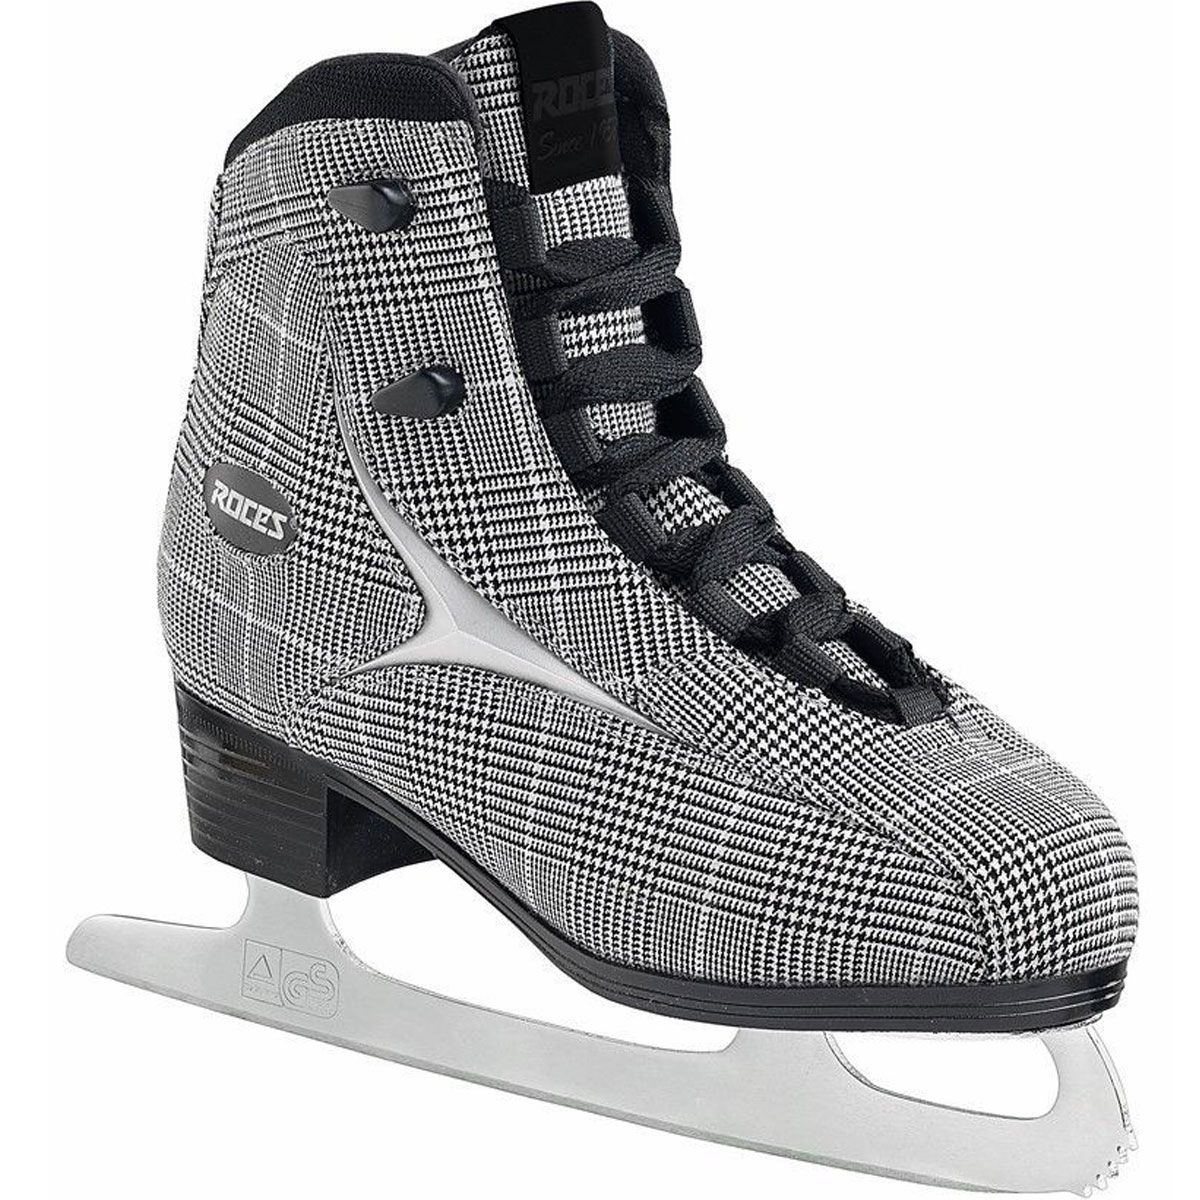 Roces Women's Brits Ice Skate Superior Italian Style 450557 00003 - image 2 of 2